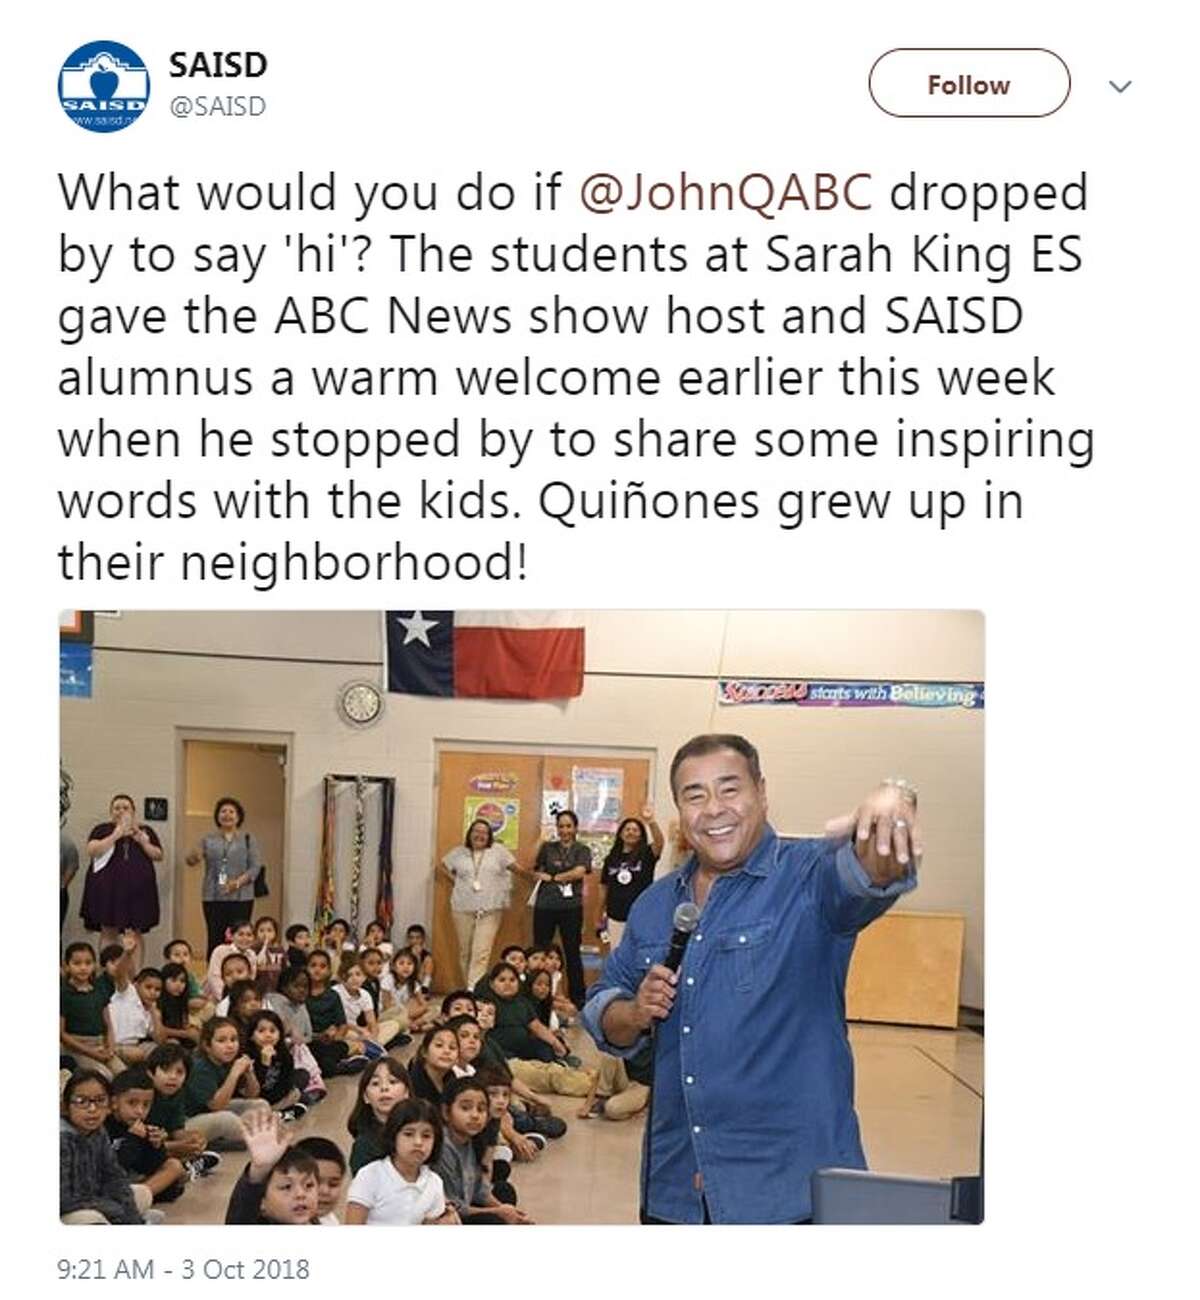 Twitter/SAISD: What would you do if @JohnQABC dropped by to say hi? The students at Sarah King ES gave the ABC News show host and SAISD alumnus a warm welcome earlier this week when he stopped by to share some inspiring words with the kids. Quiñones grew up in their neighborhood.